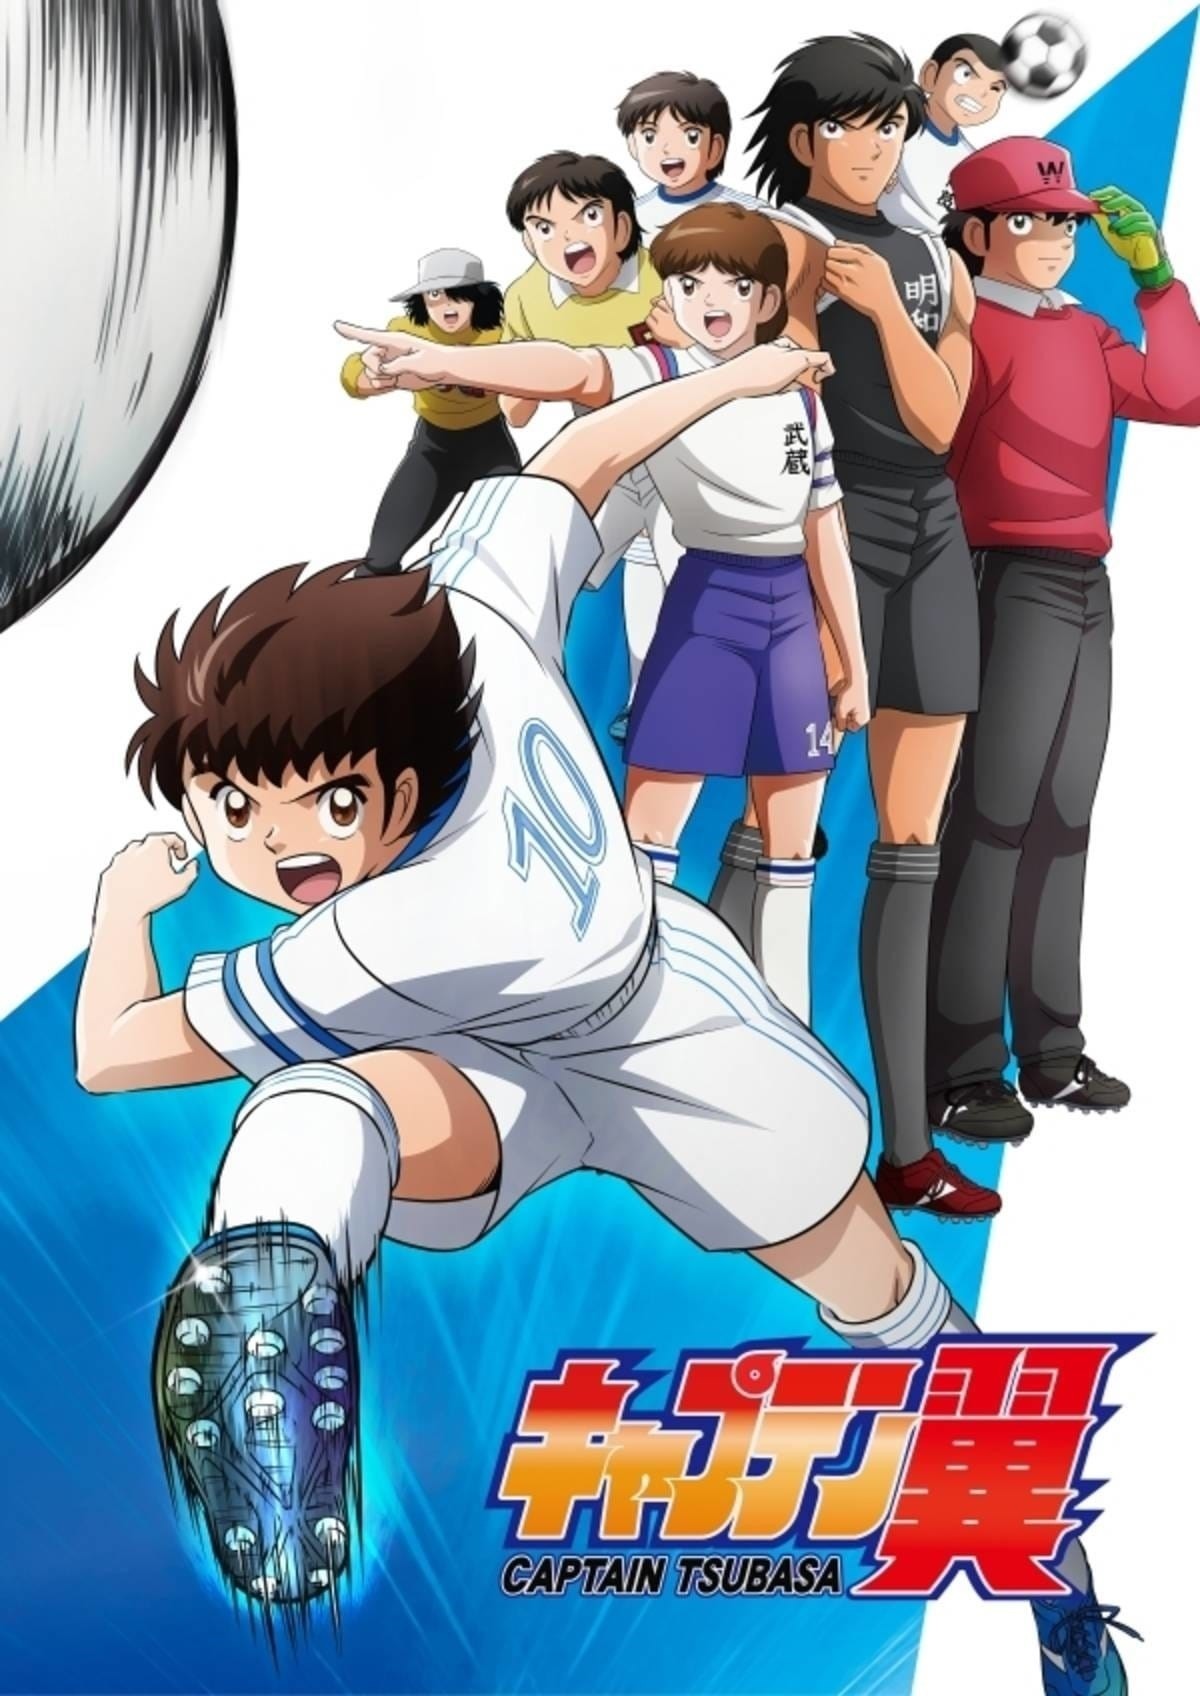 Anime Soccer ! - iPhone/iPad game play online at Chedot.com